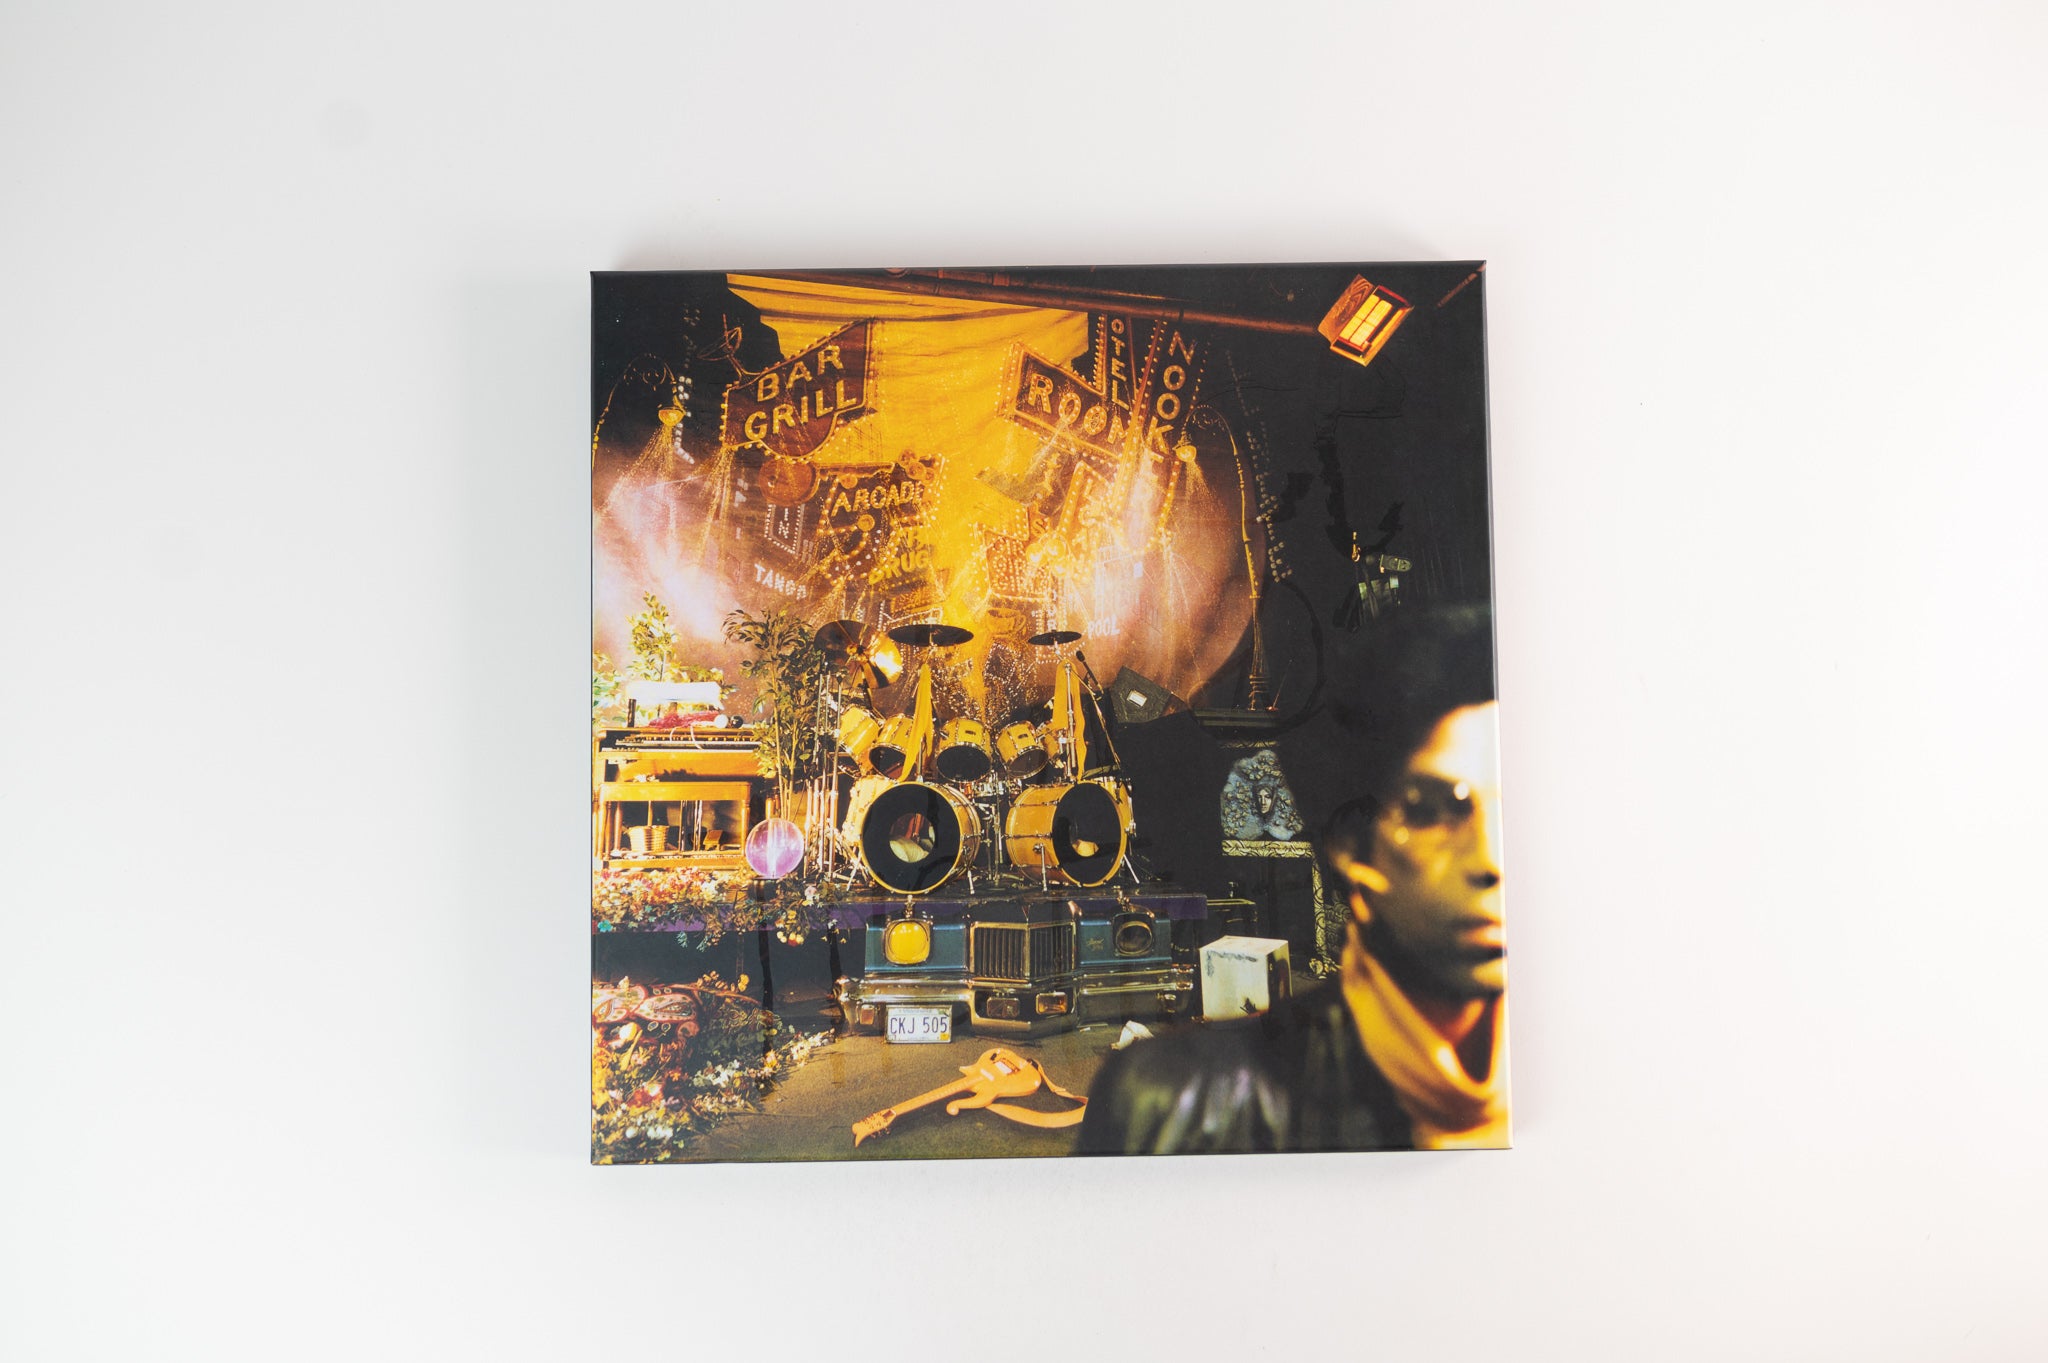 Prince - Sign "O" The Times on NPG Paisley Park Deluxe Edition Box Set Reissue